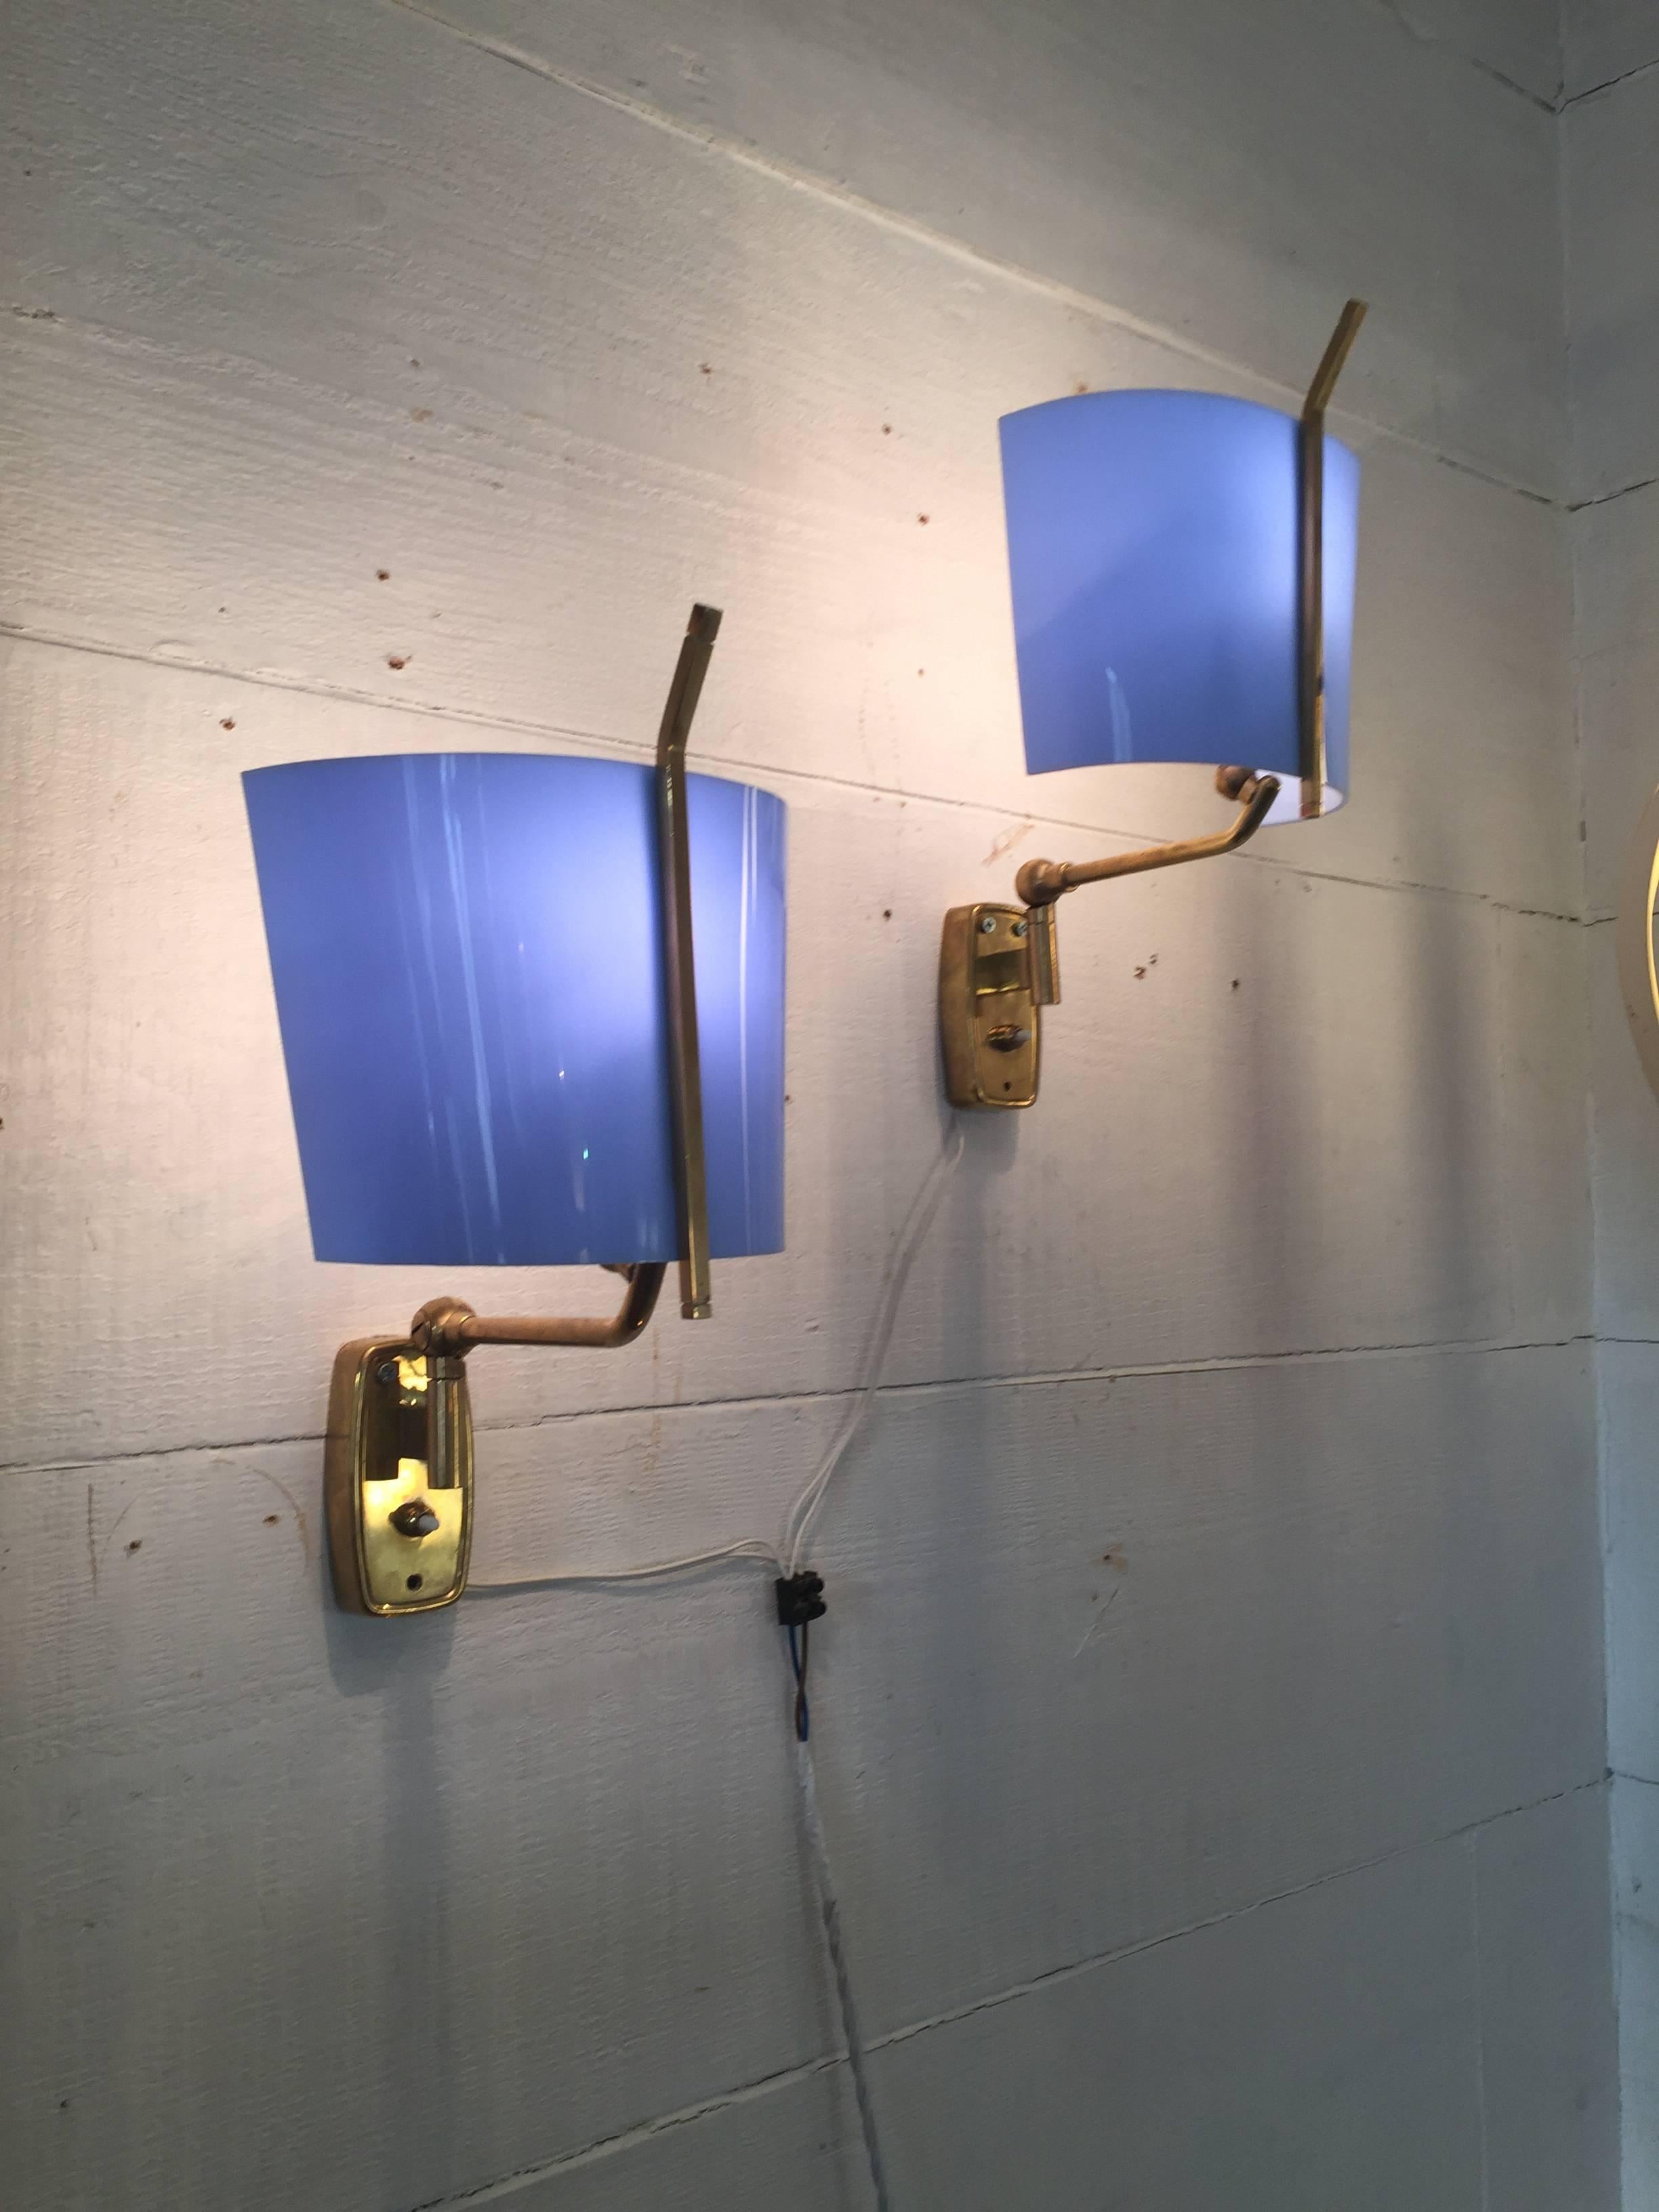 Pair of wall lamps, design stilnovo, 1950.
Brass structure, light diffuser in persplex colored, in perfect condition, marked stilnovo.